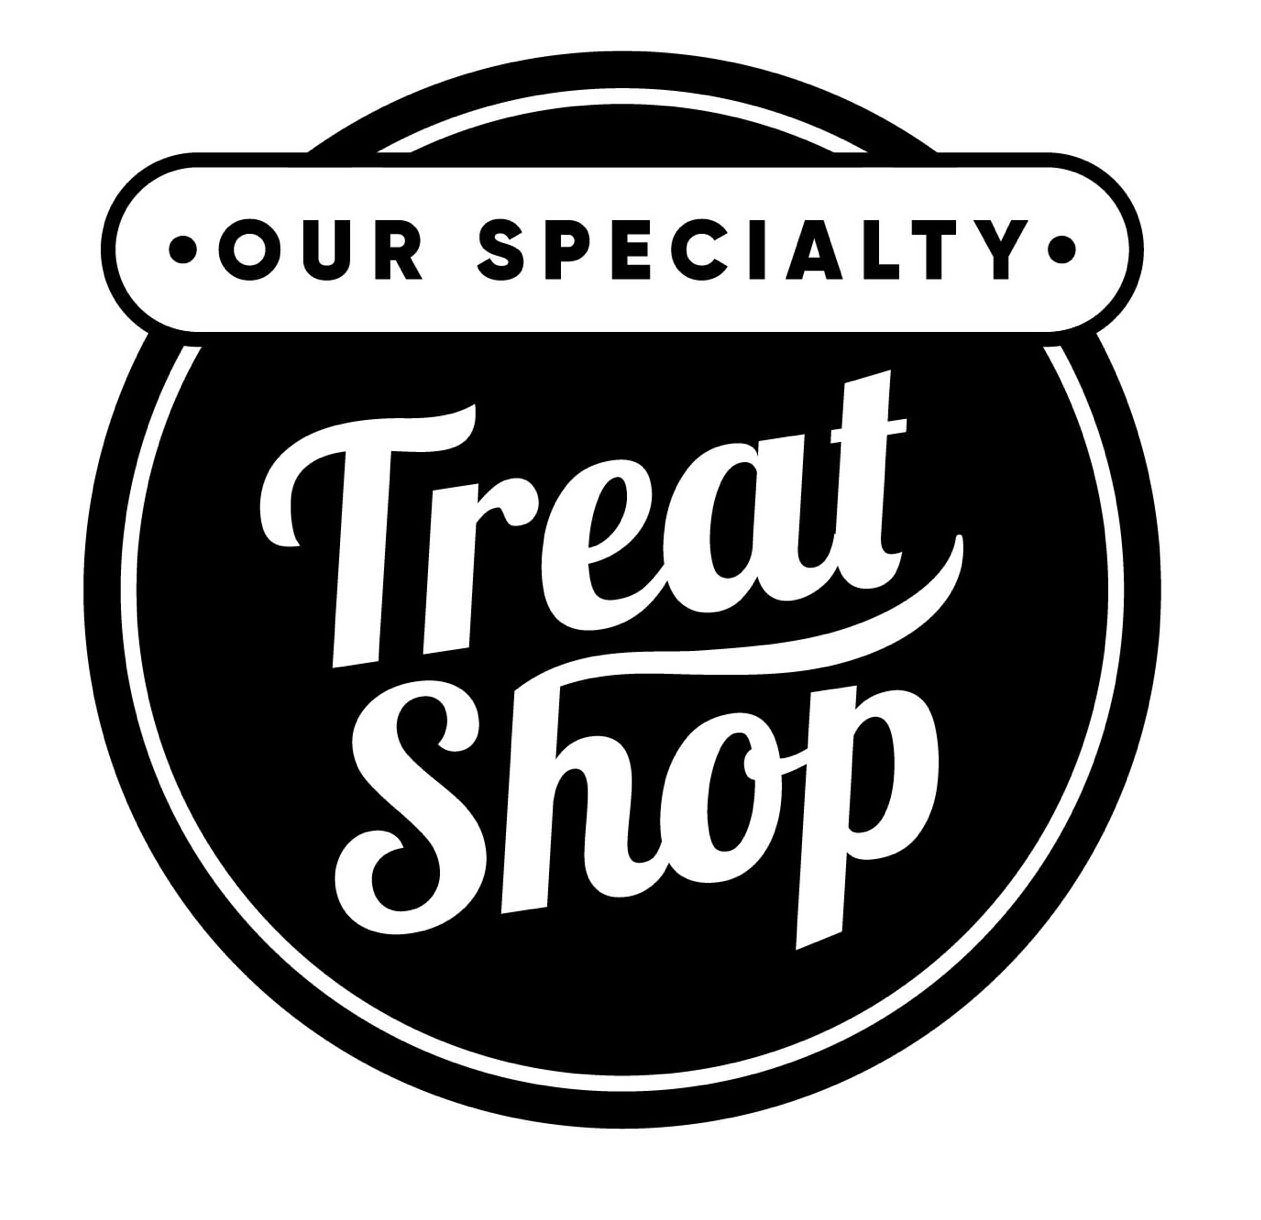  OUR SPECIALTY TREAT SHOP